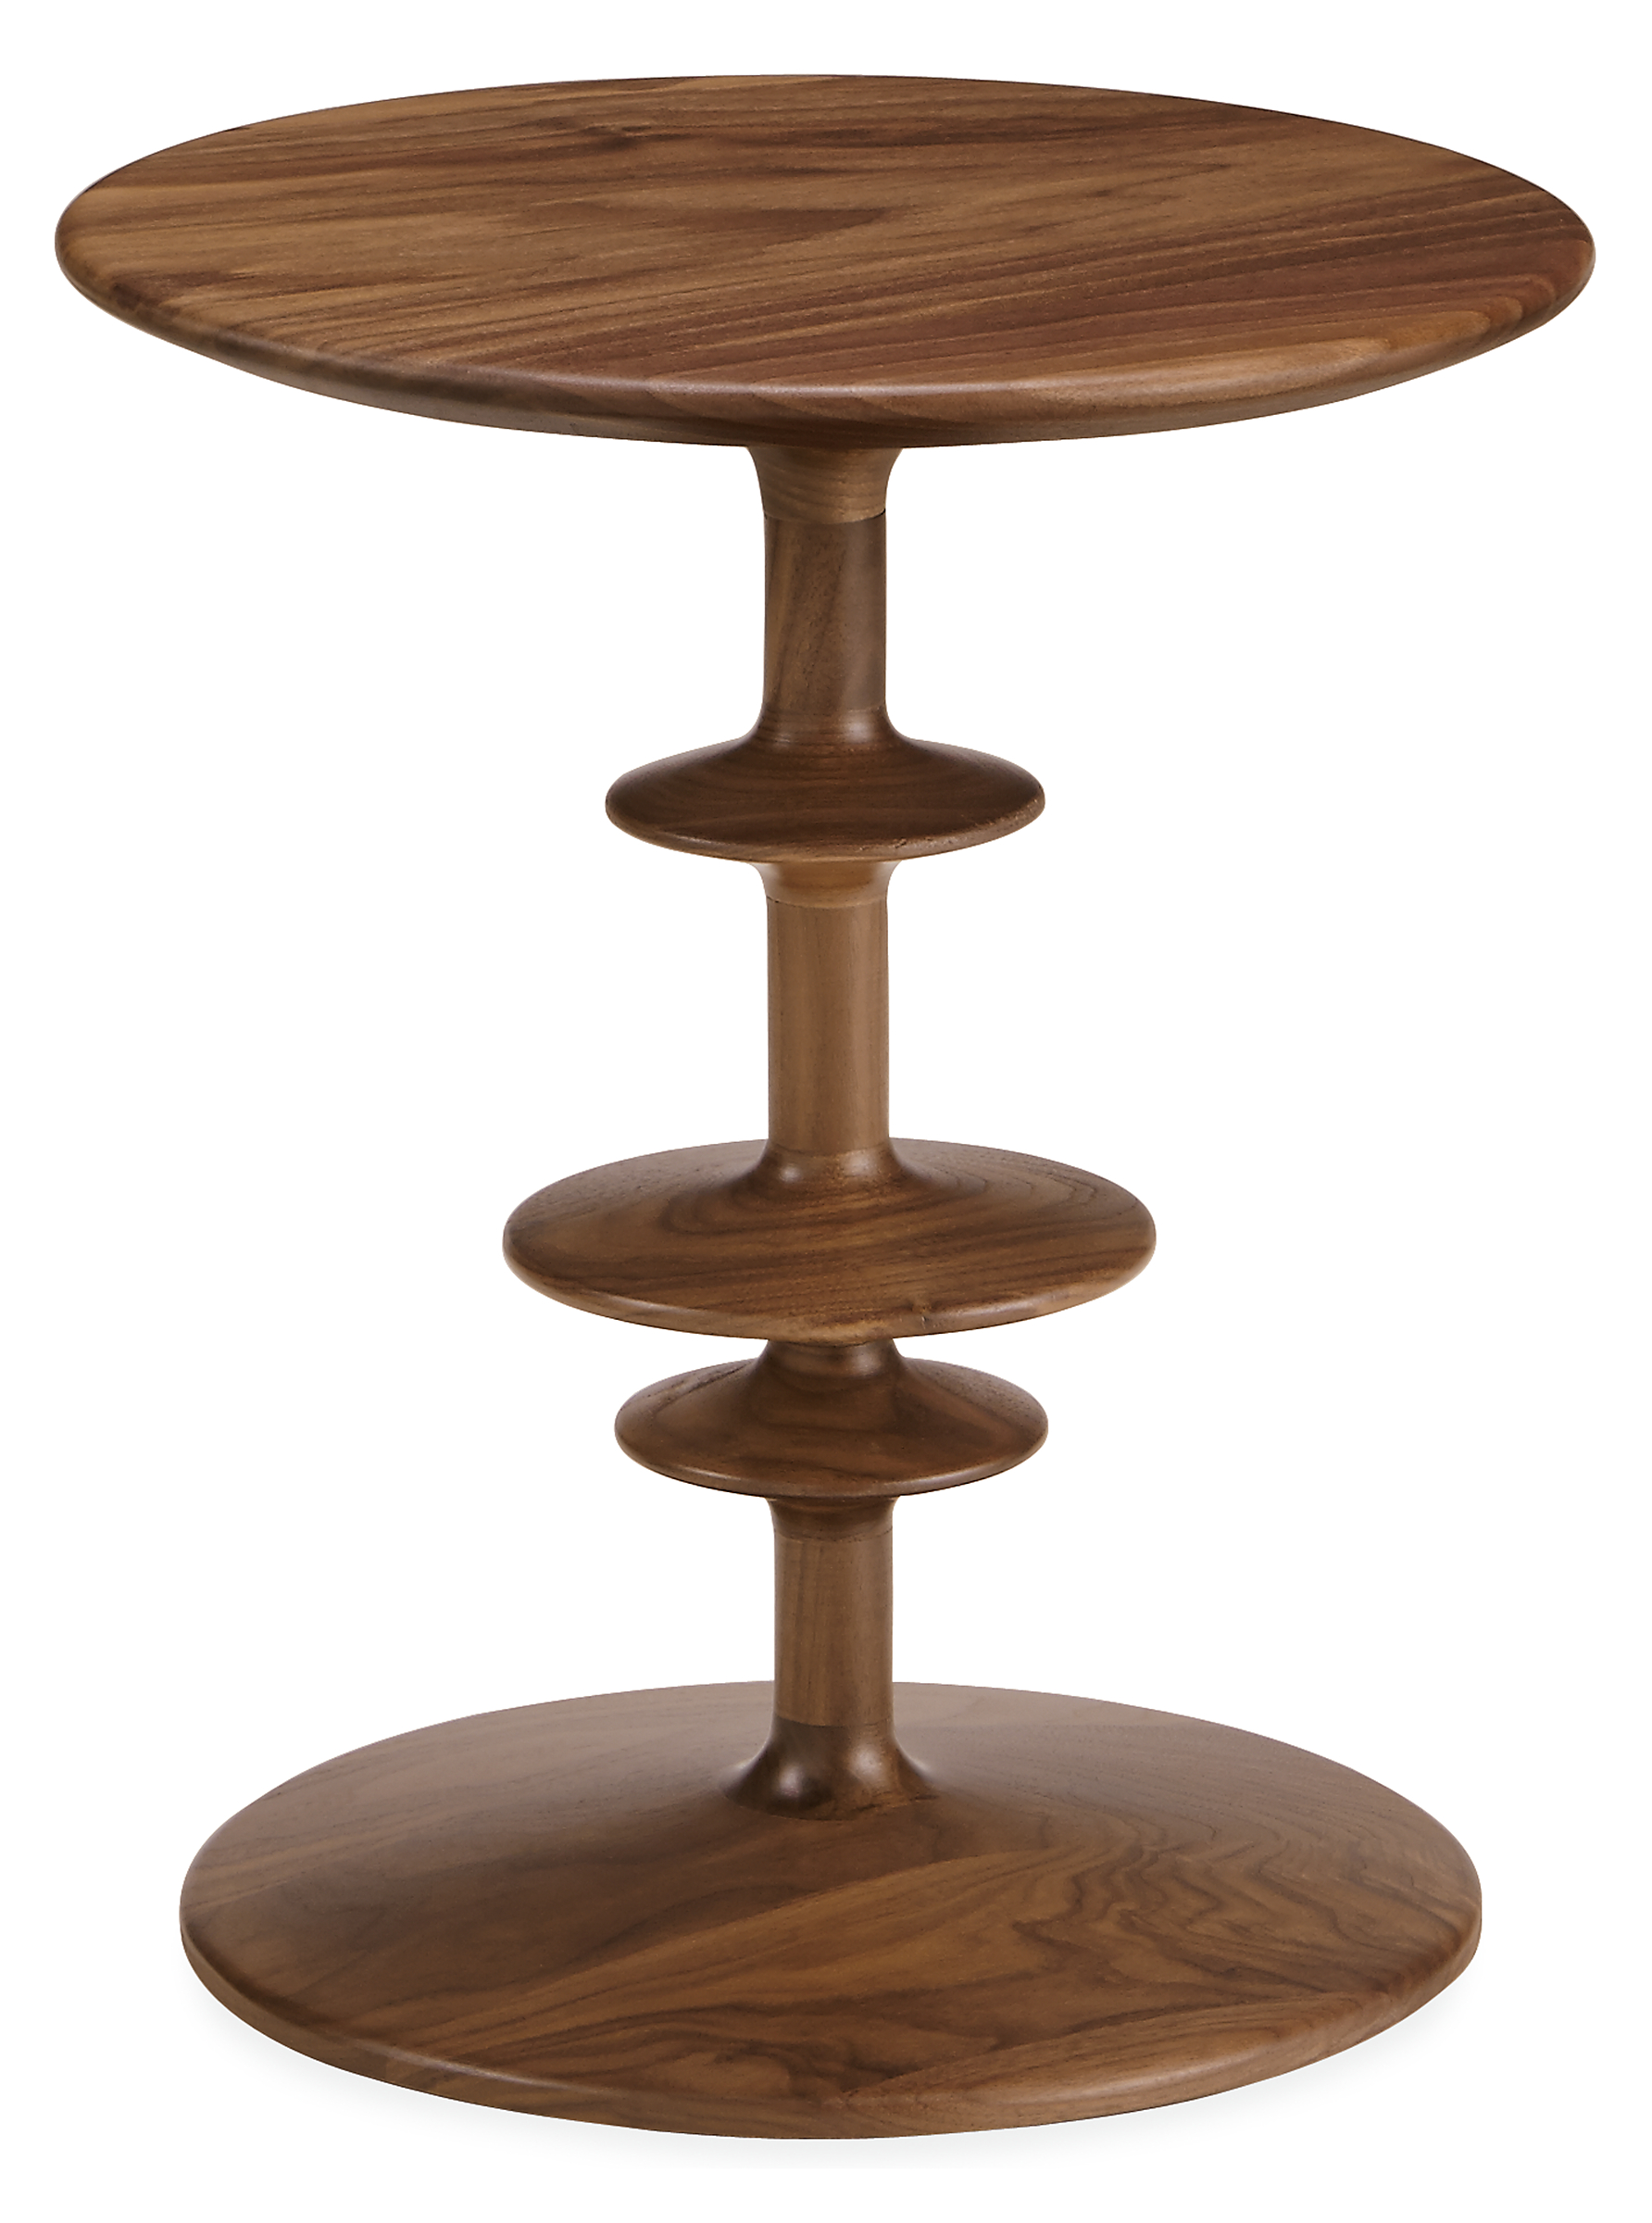 Parks 14 diam 16h Round End Table